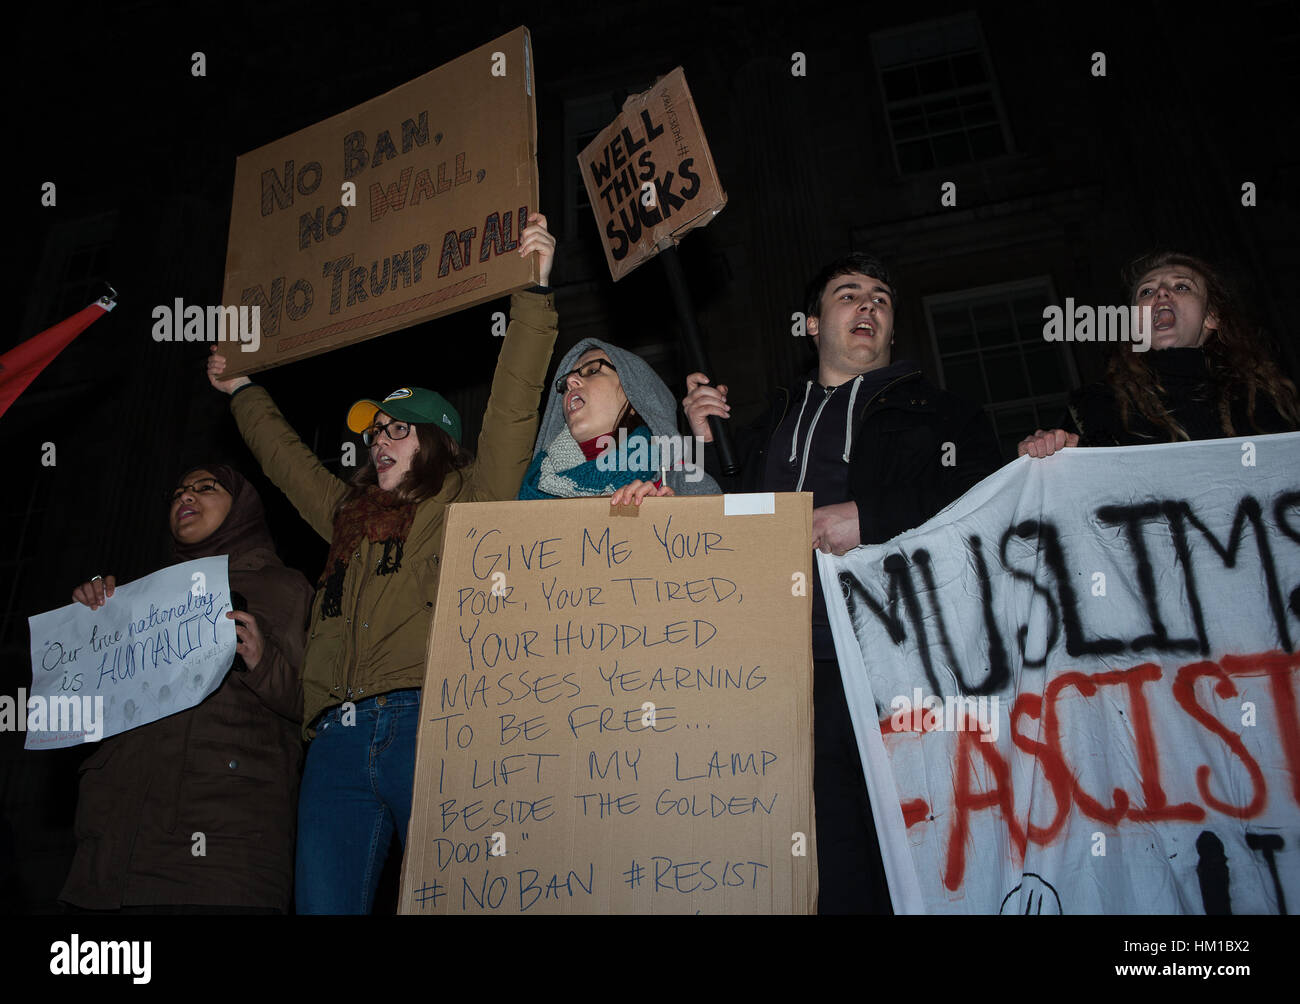 London, UK. 30th Jan, 2017. Protesters during a demonstration outside Downing Street, in opposition to Donald Trump's travel ban targeting seven predominantly Muslim countries. Credit: Jo Syz/Alamy Live News Stock Photo